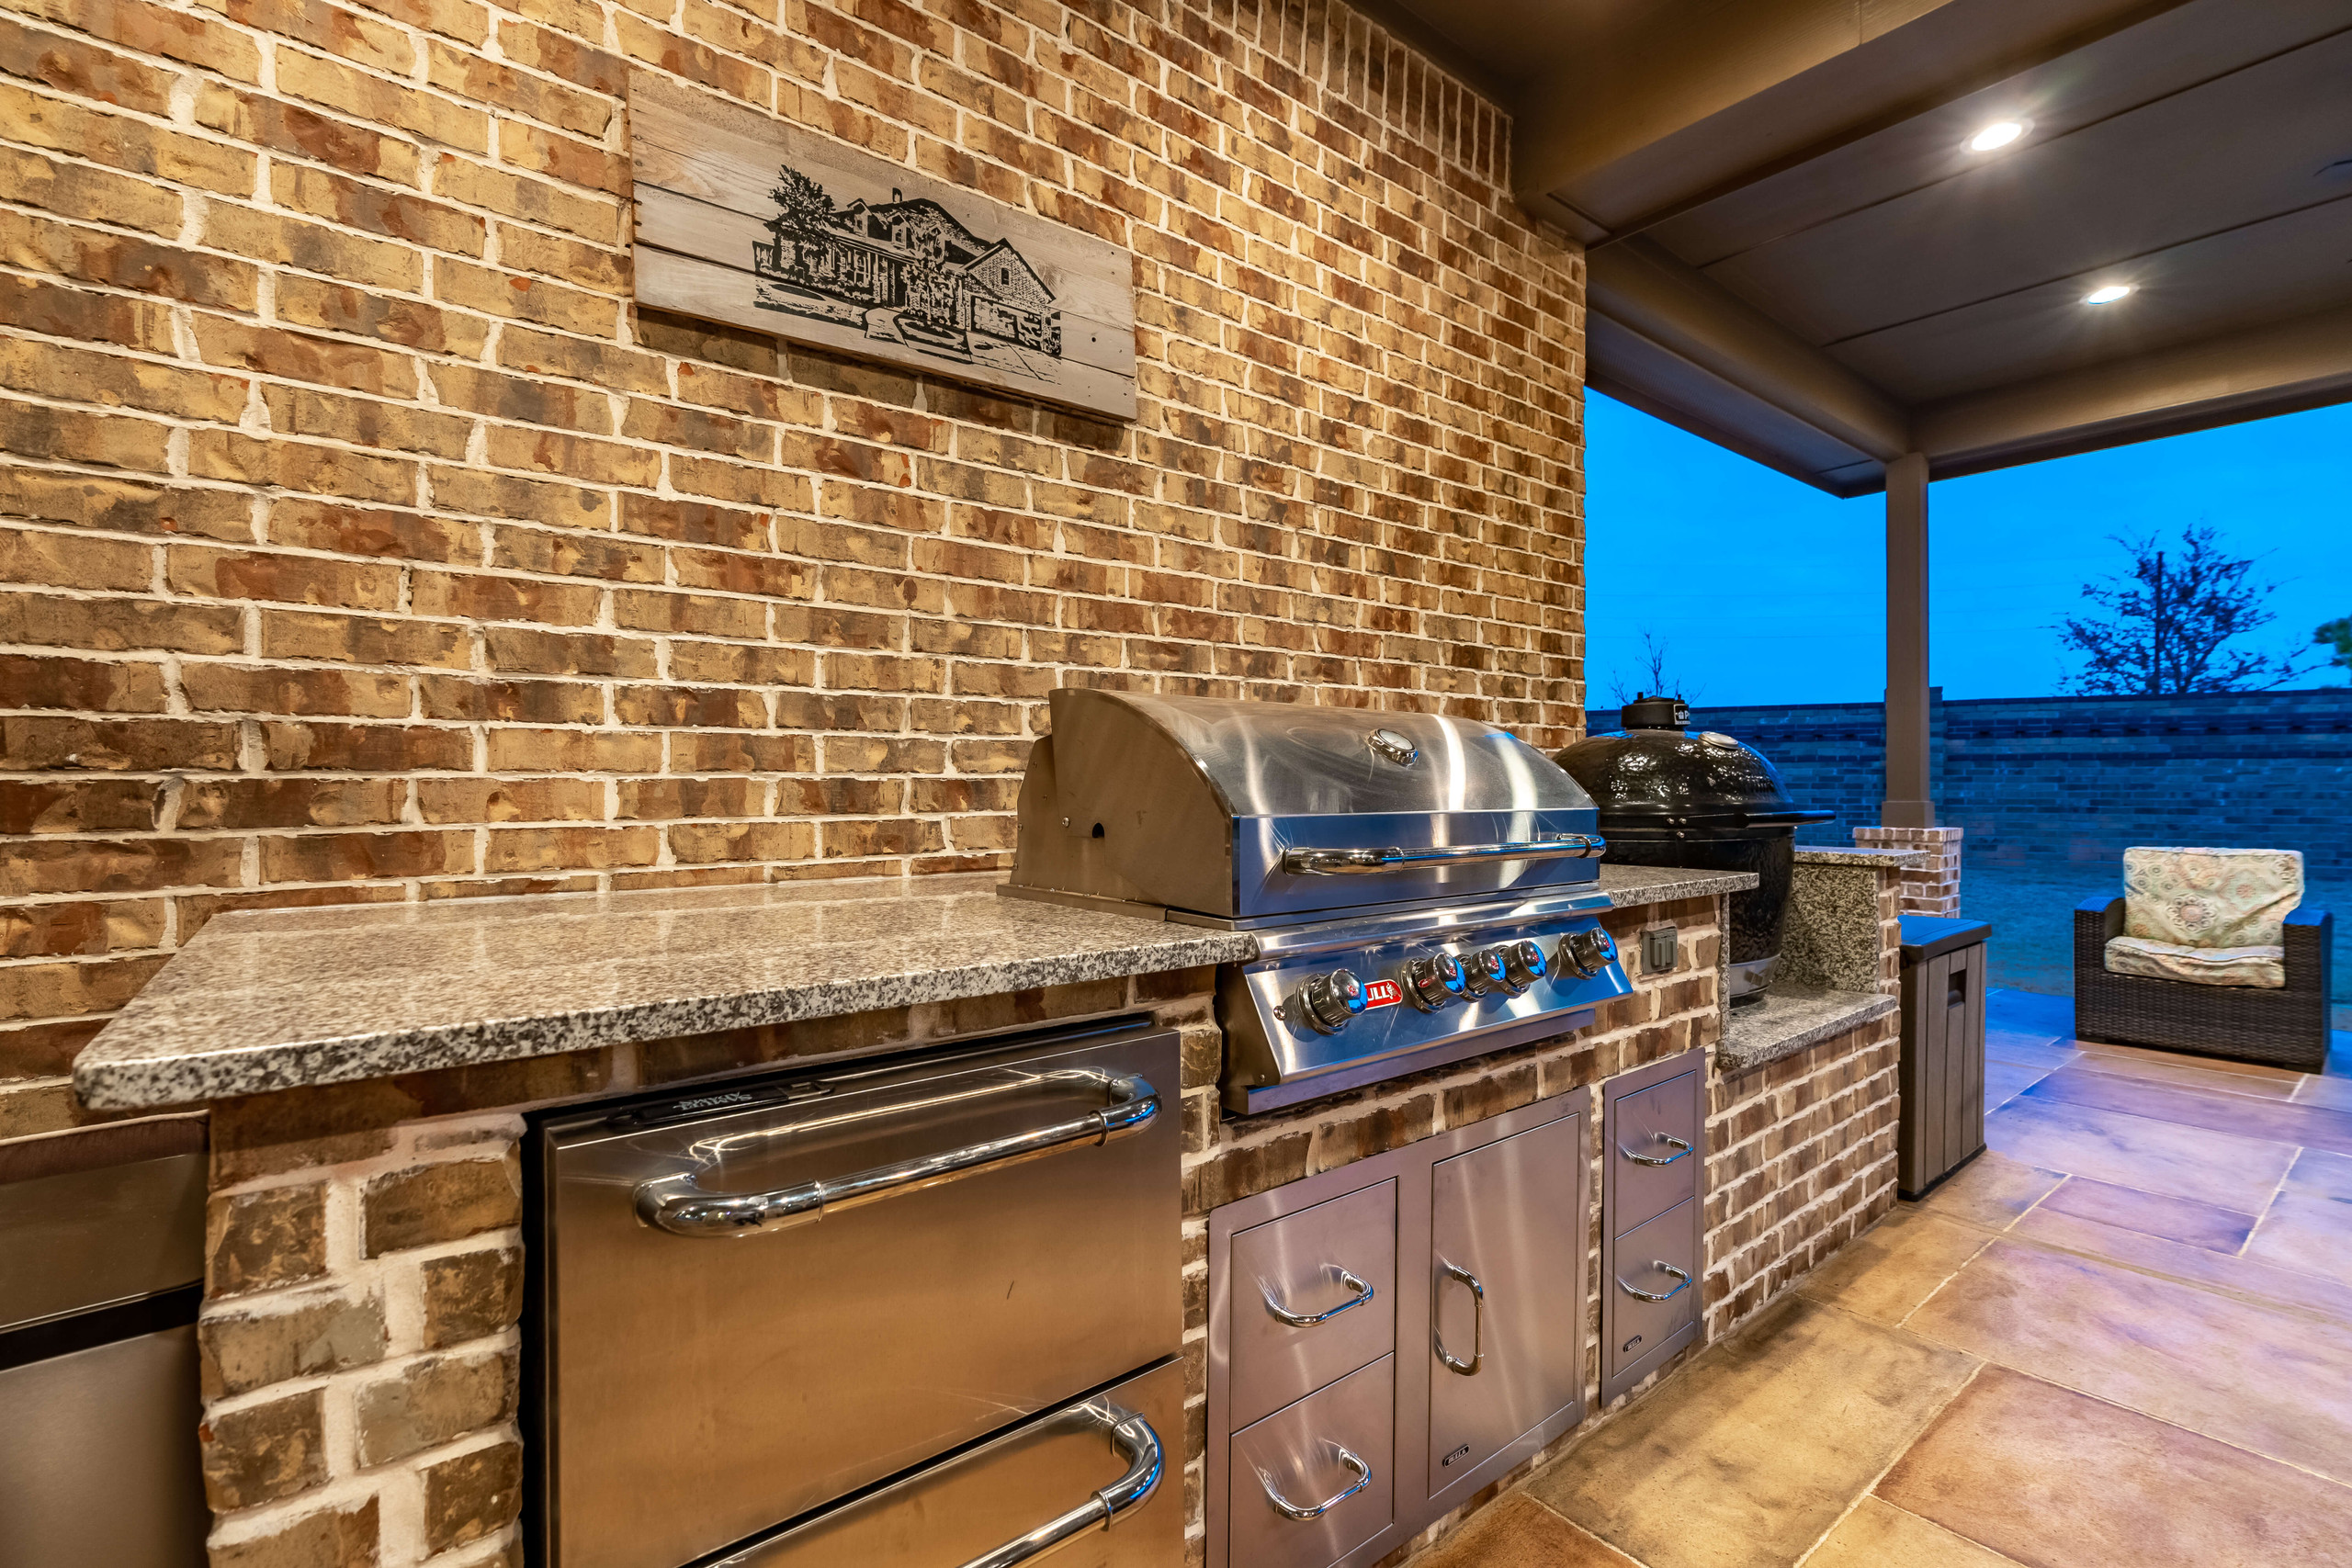 Outdoor grilling and kitchen area with shaded patio cover